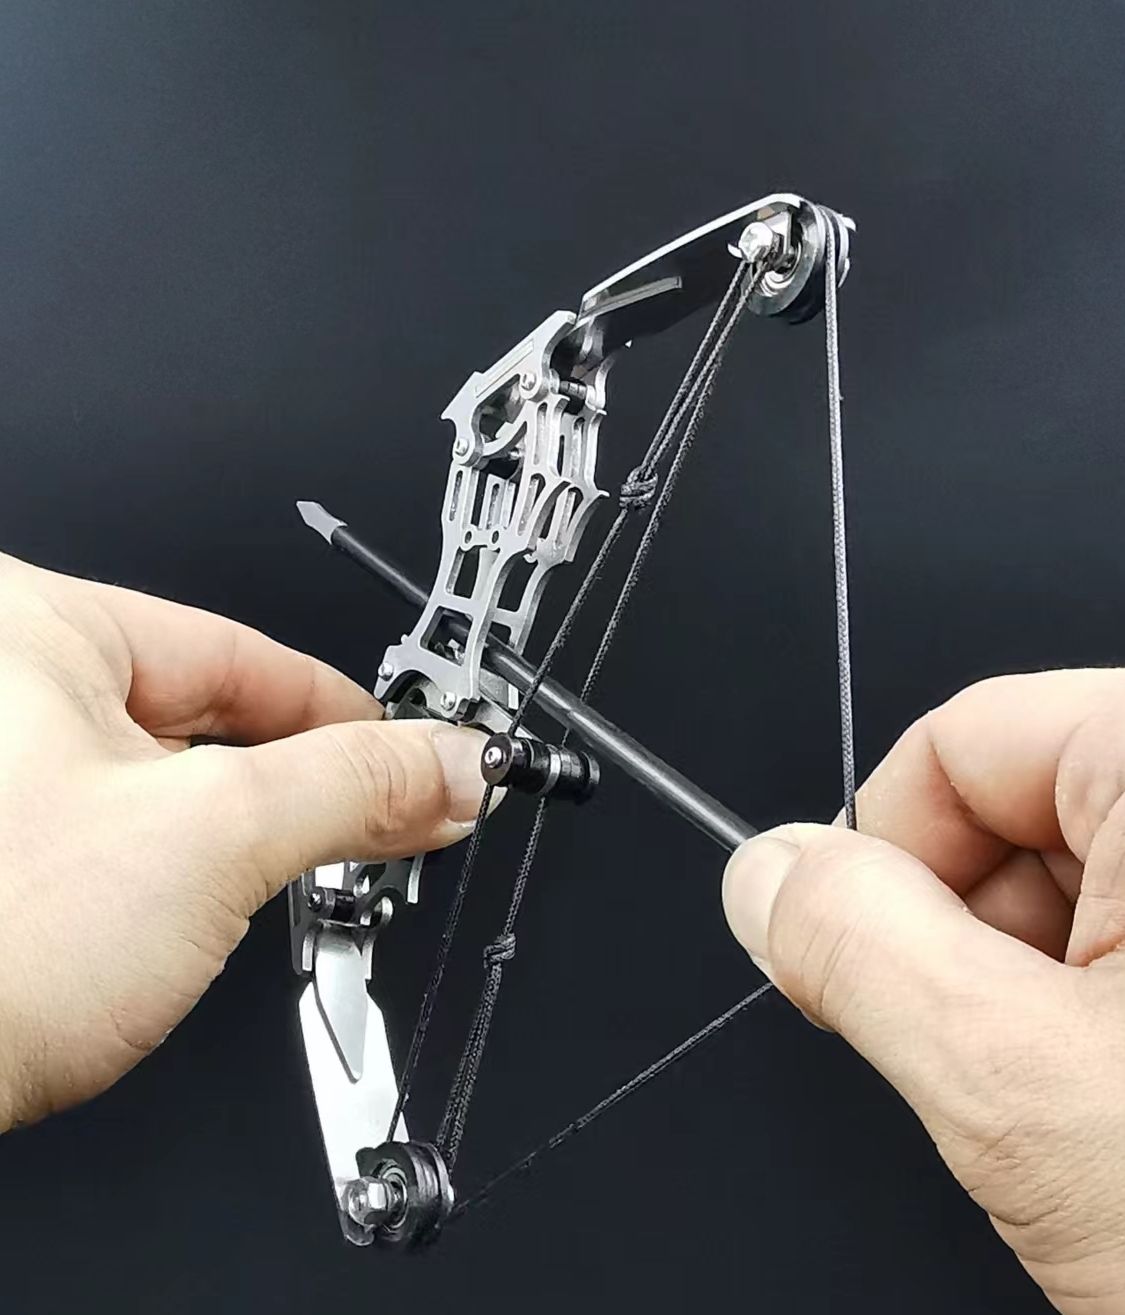 Mini Bow and Arrow Pulley Micro Pocket Compound Bow Sport Shooting Arrow Target Shooting